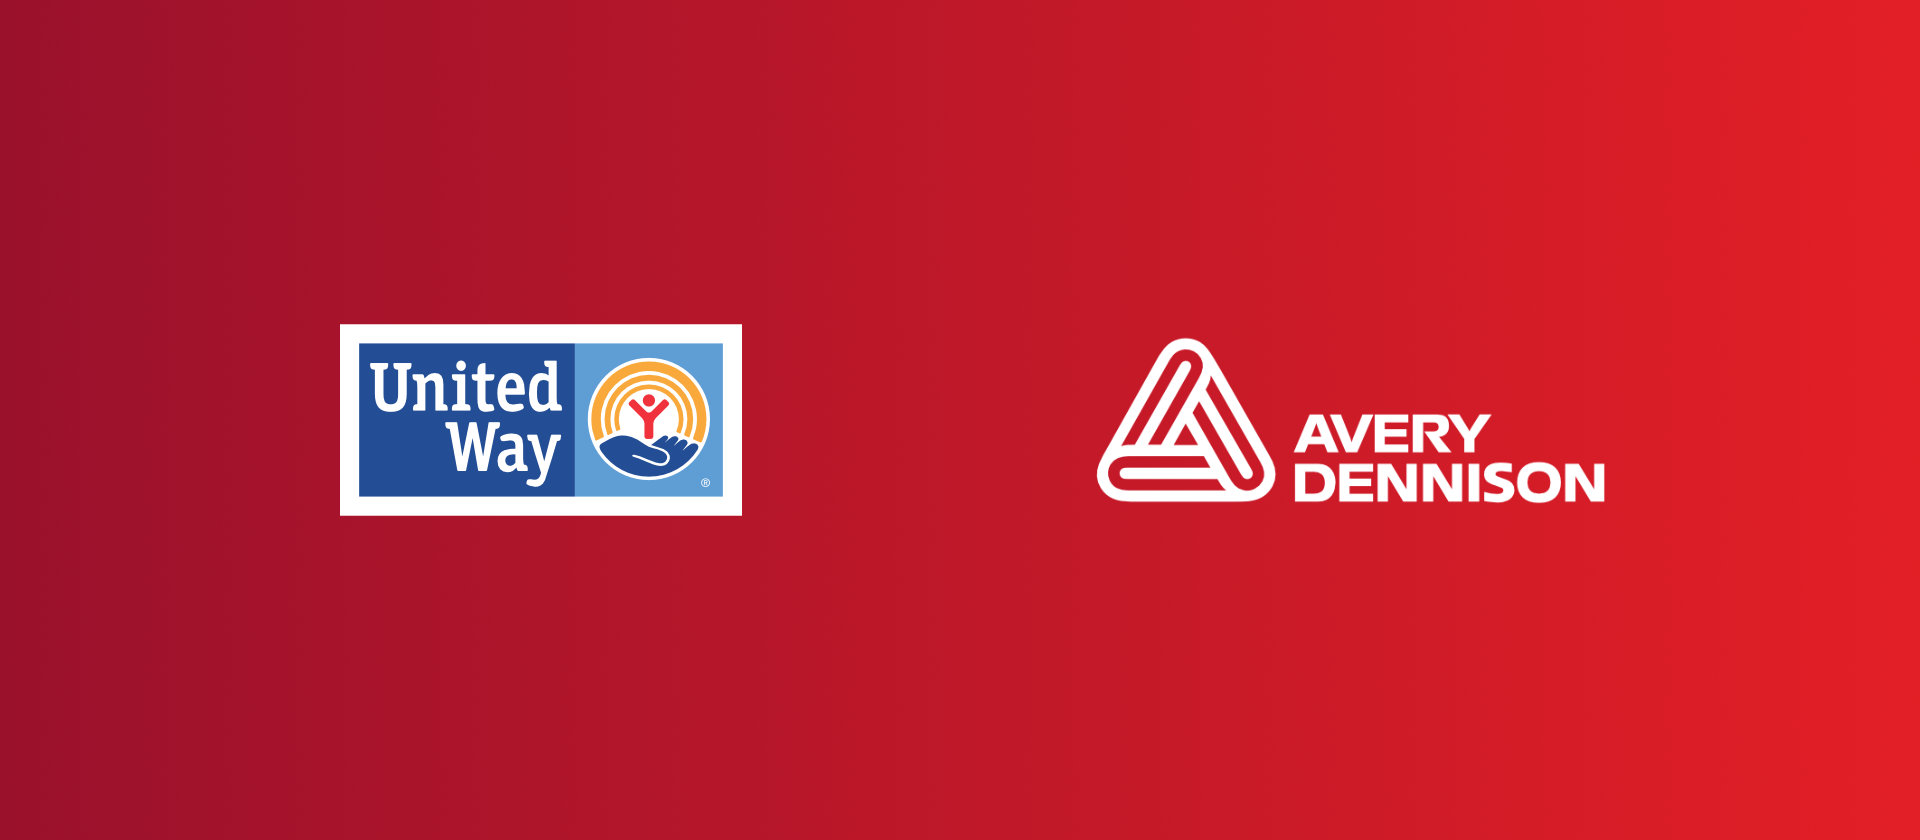 Avery Dennison North America sites raise over $500k for United Way